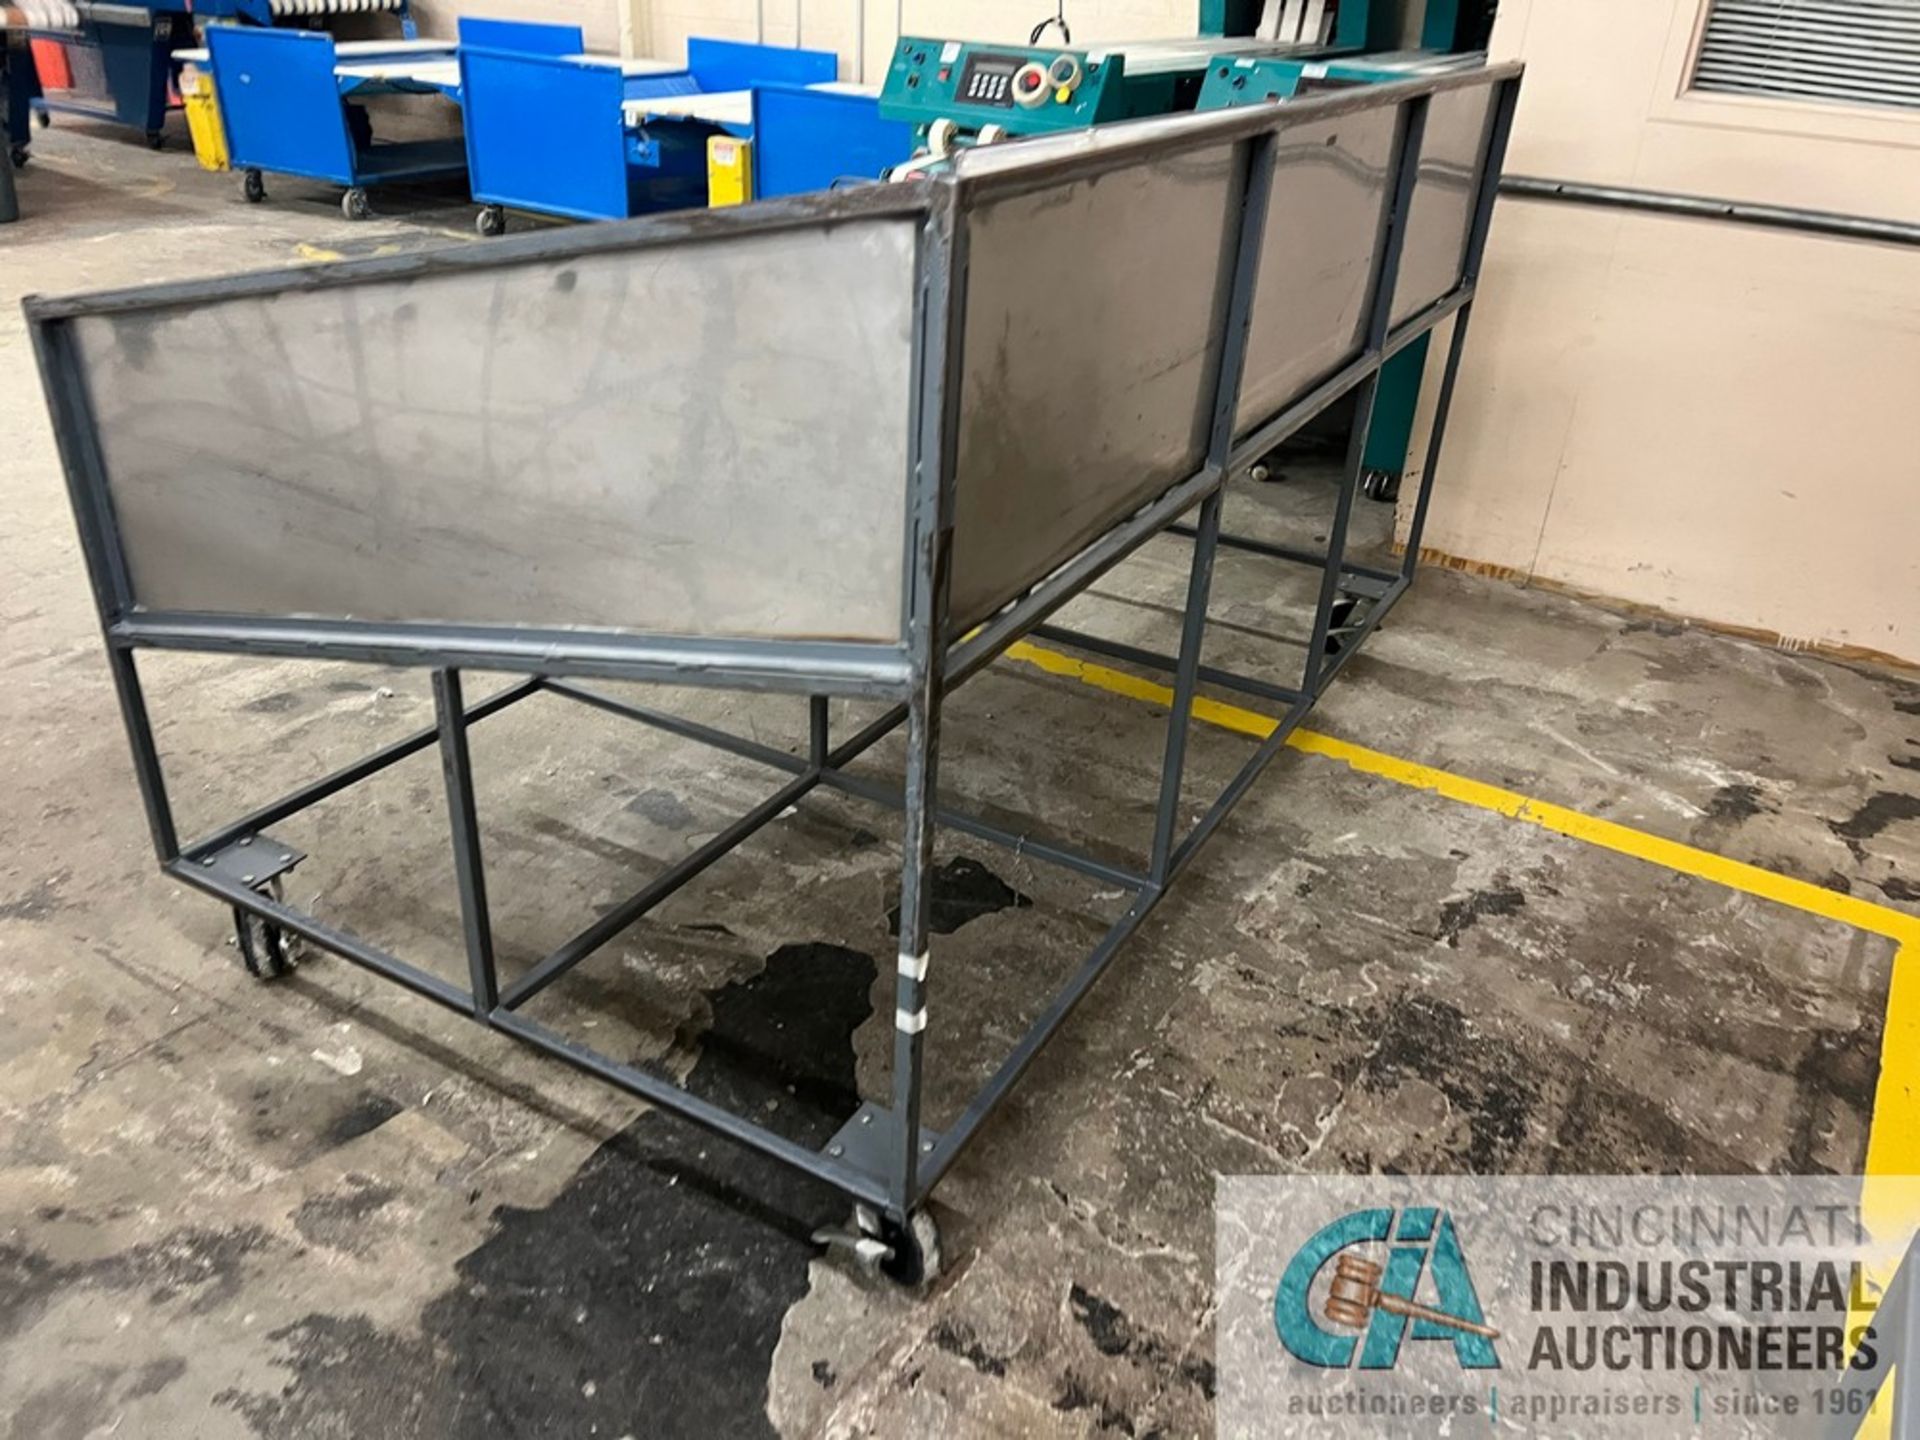 52" X 93" LONG X 17" HIGH STAINLESS STEEL TUB STEEL FRAME SORTING CART, 54" OVERALL HEIGHT - Image 3 of 3